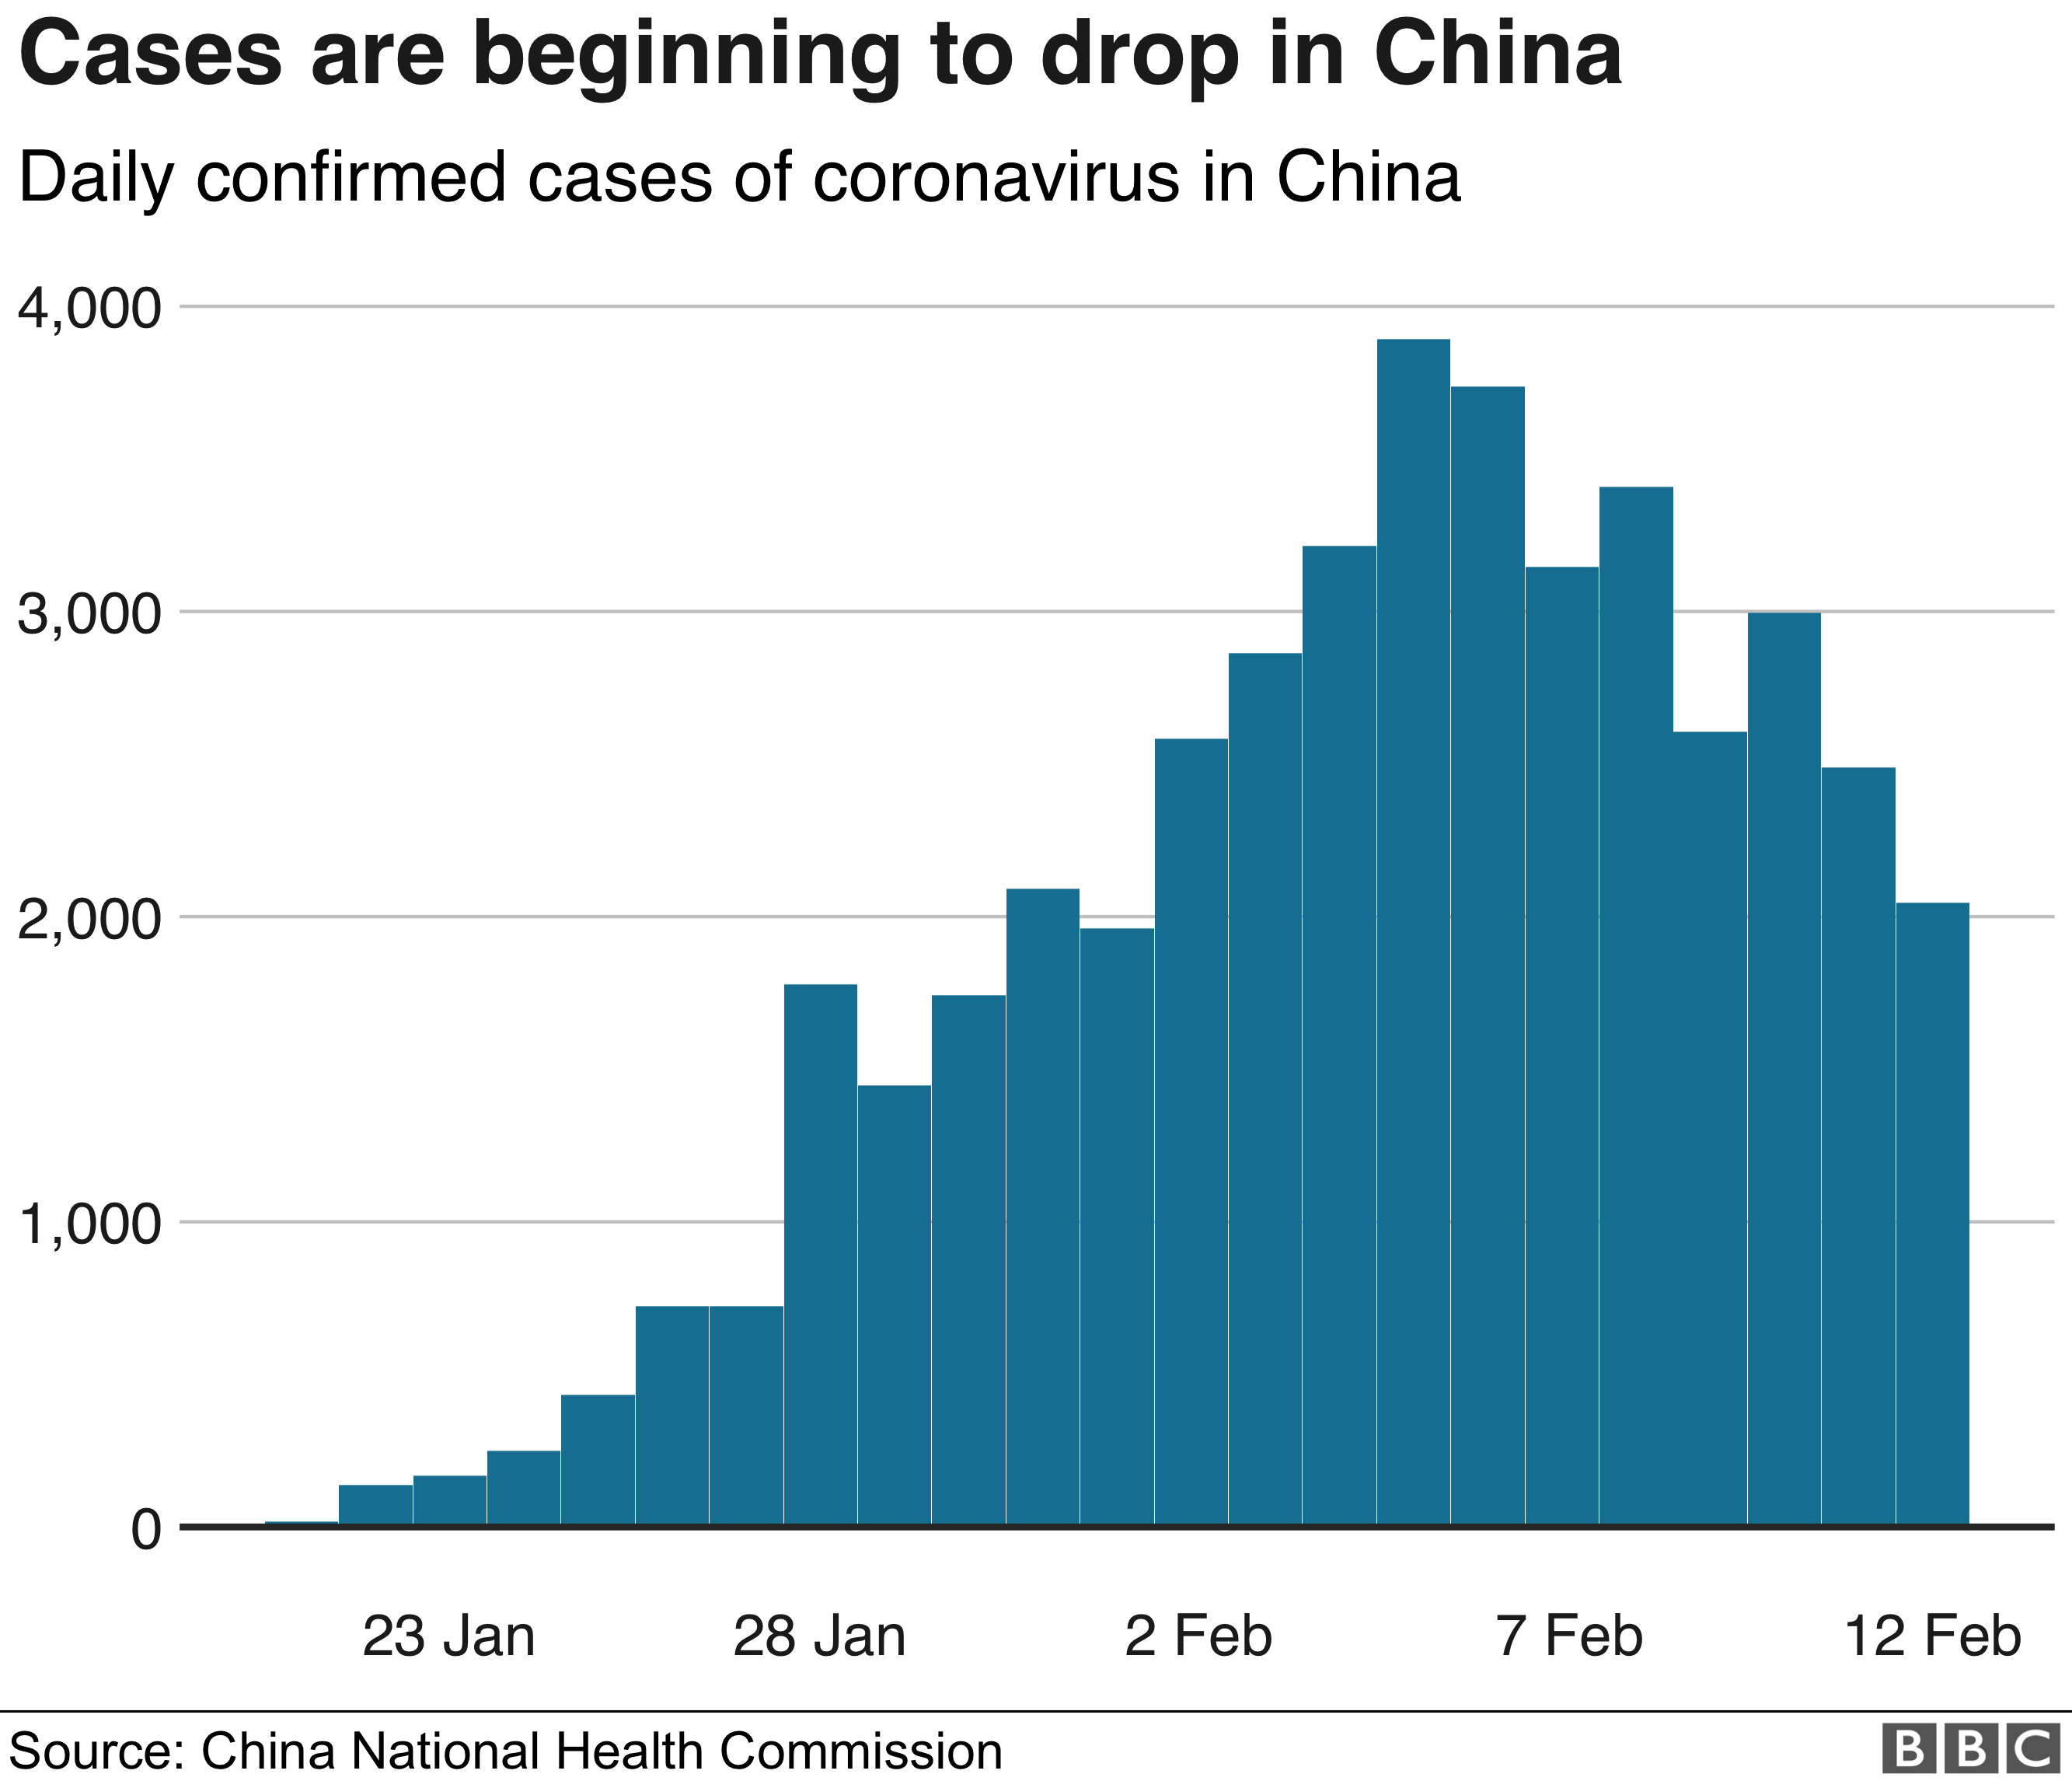 Chart showing daily confirmed cases of coronavirus in China